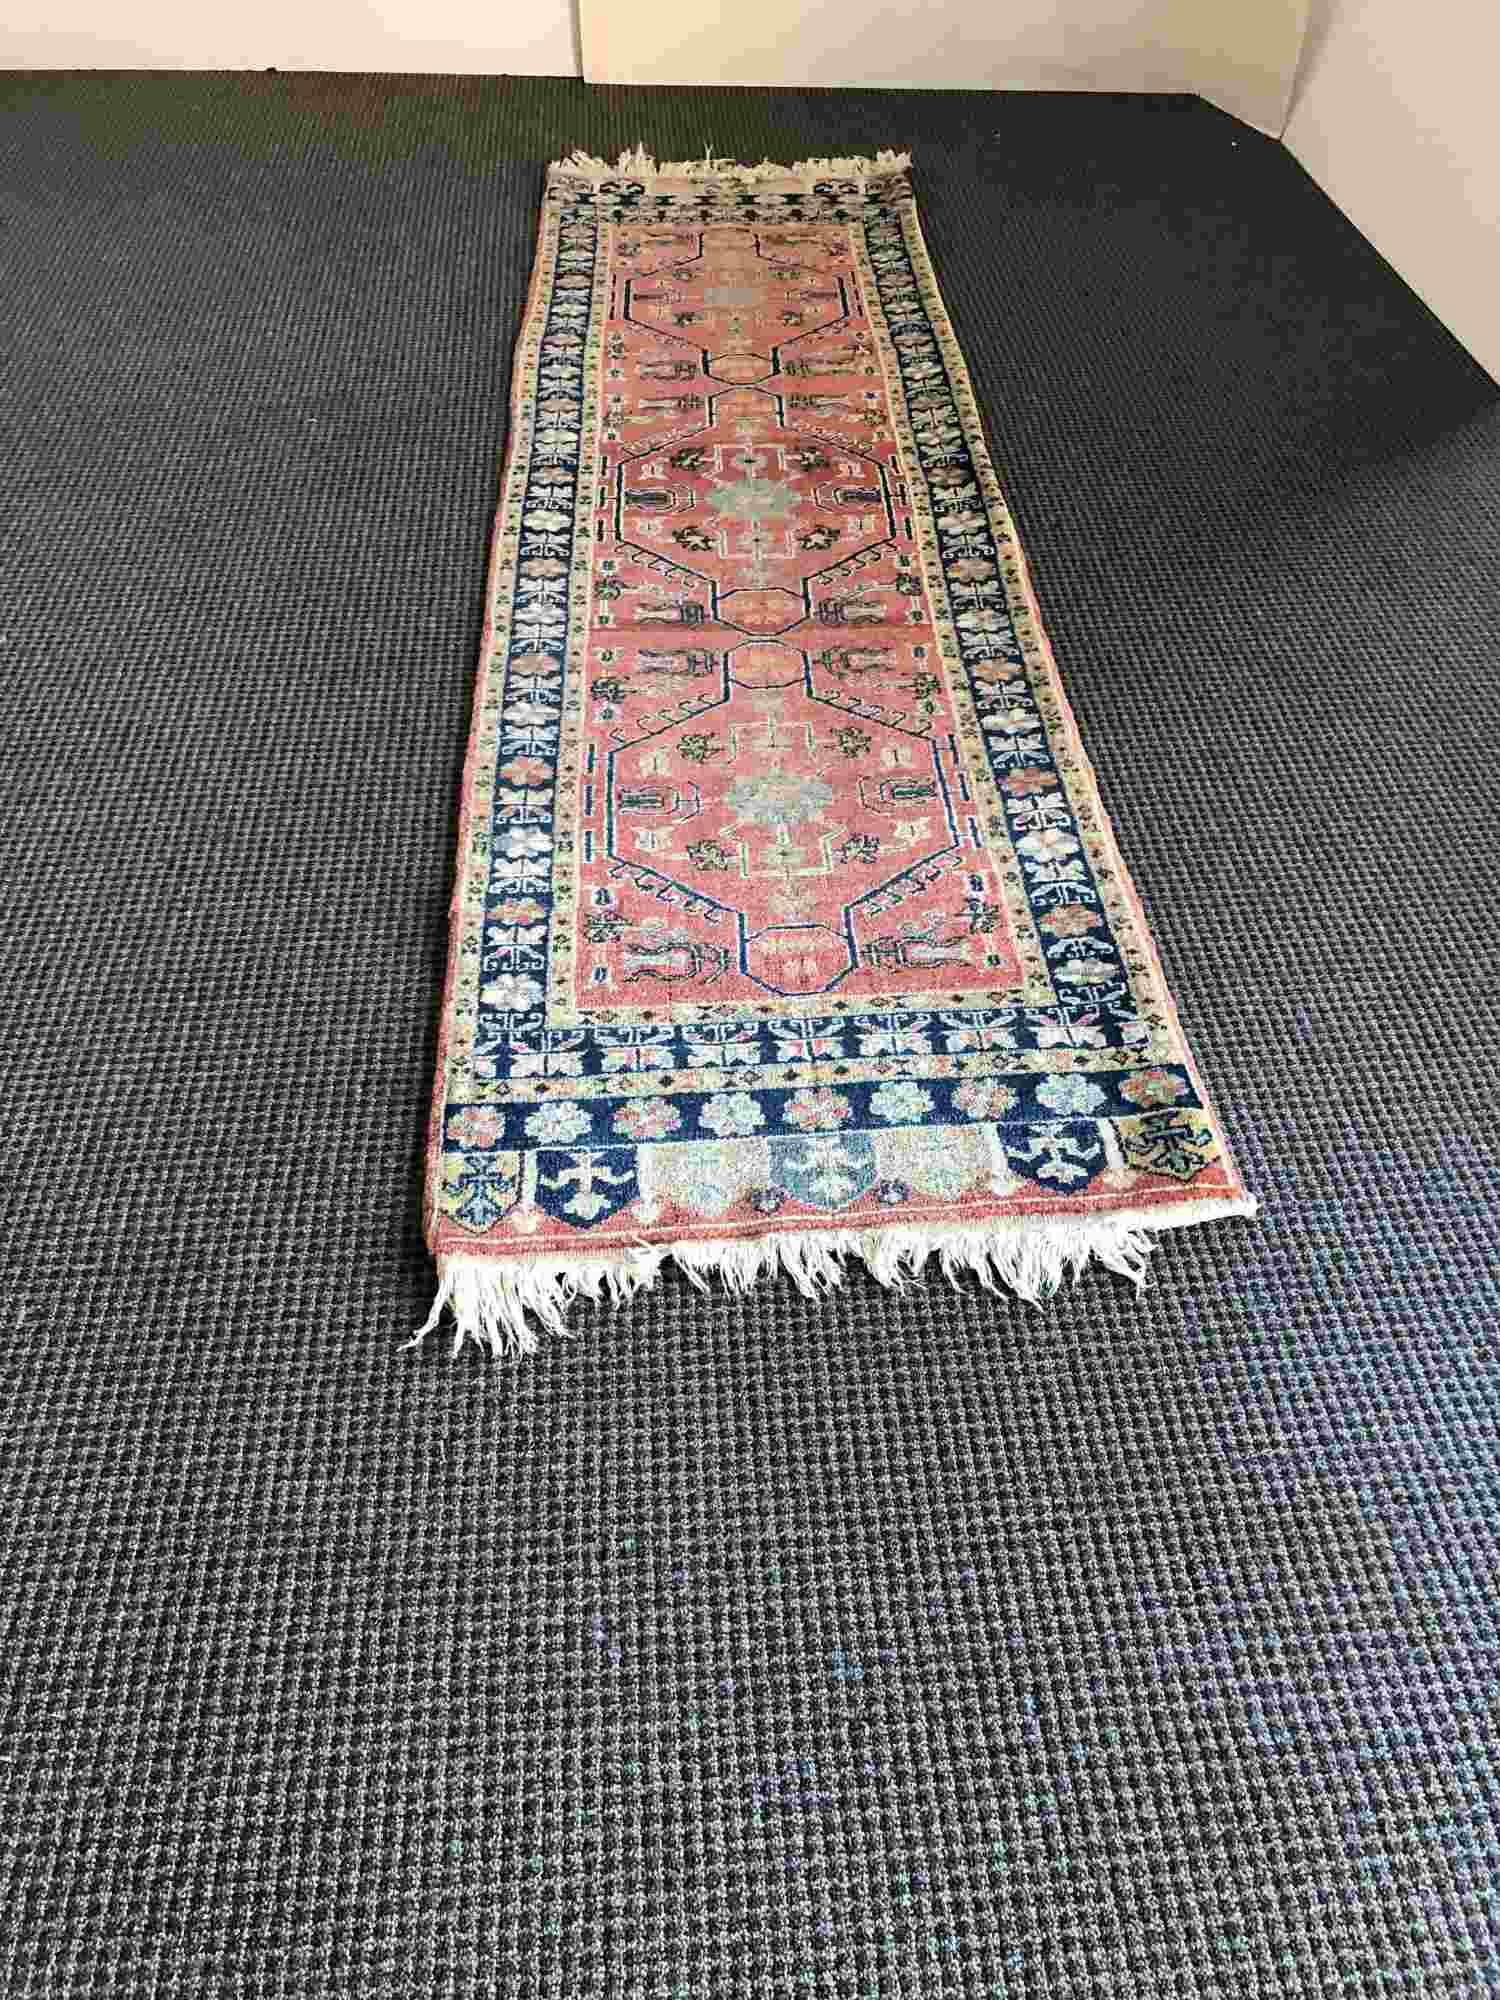 RED'S, CREAMS, AND BLUES ORIENTAL STYLE RUNNER RUG